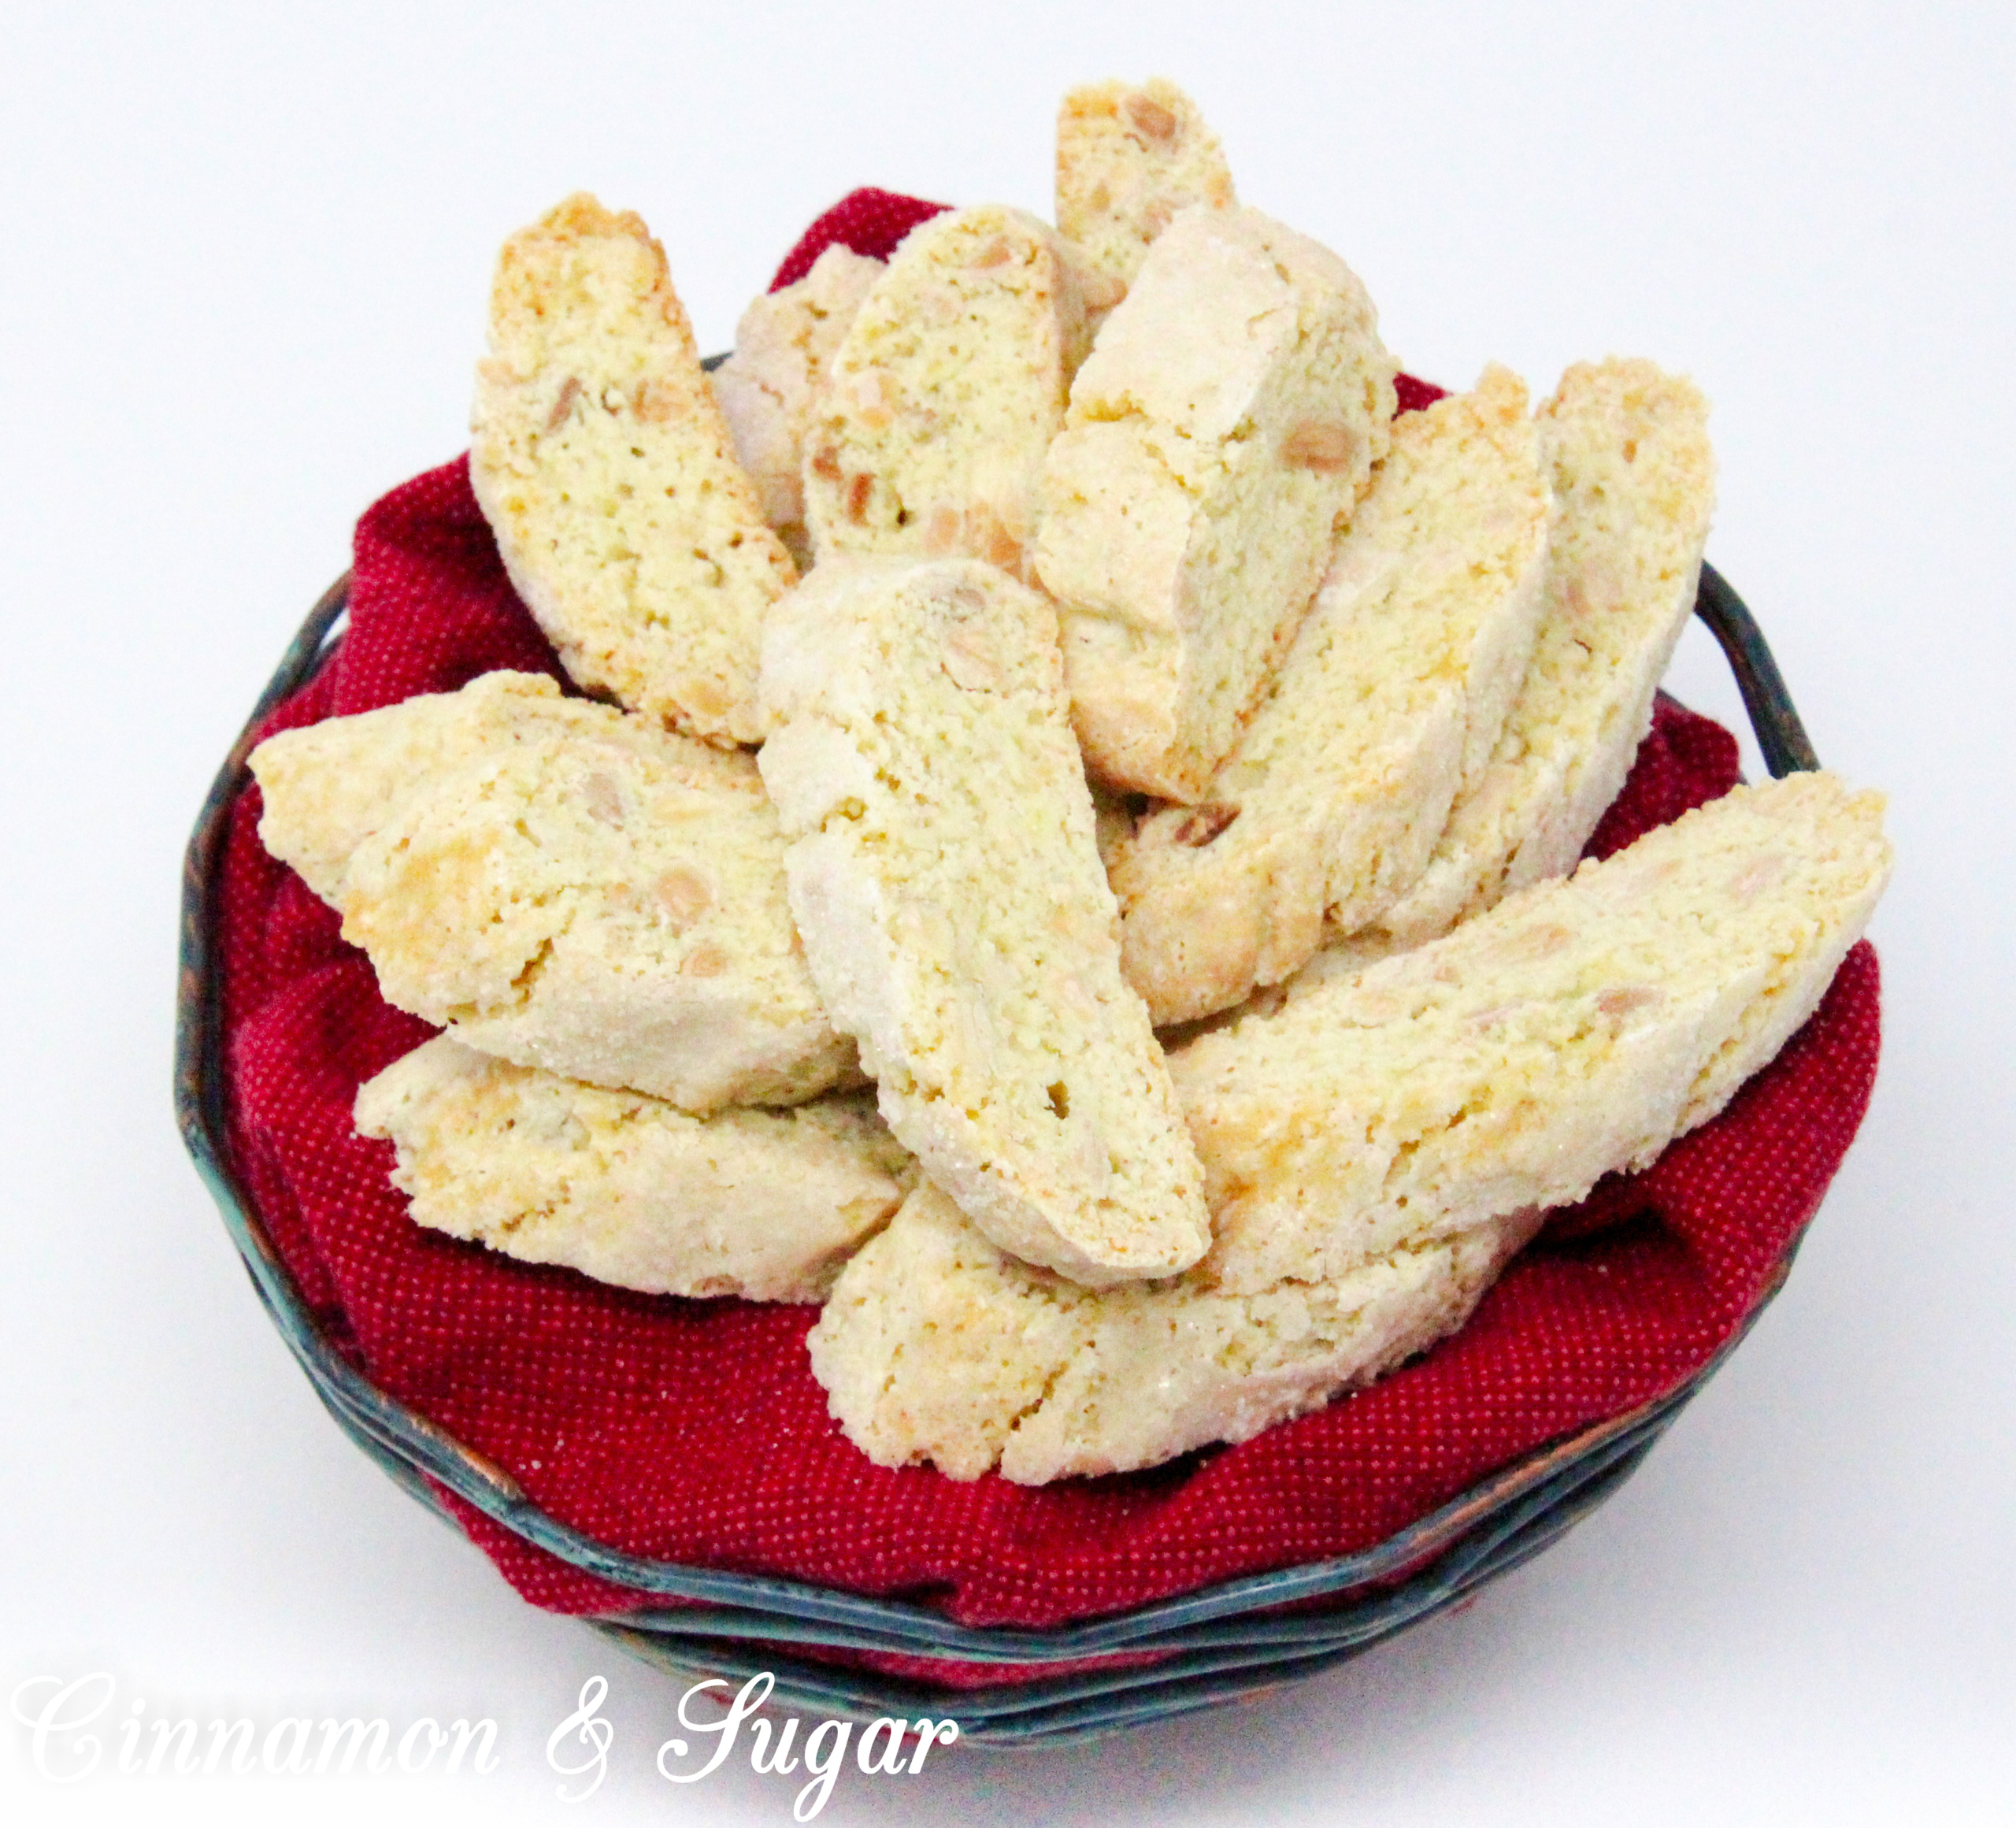 Crunchy, with a delicate almond flavor thanks to a generous amount of toasted almonds, these traditional Almond Biscotti don't contain any butter or oil. Perfect for dunking in your favorite hot beverage! Recipe shared with permission granted by Leslie Budewitz, author of THE SOLACE OF BAY LEAVES.